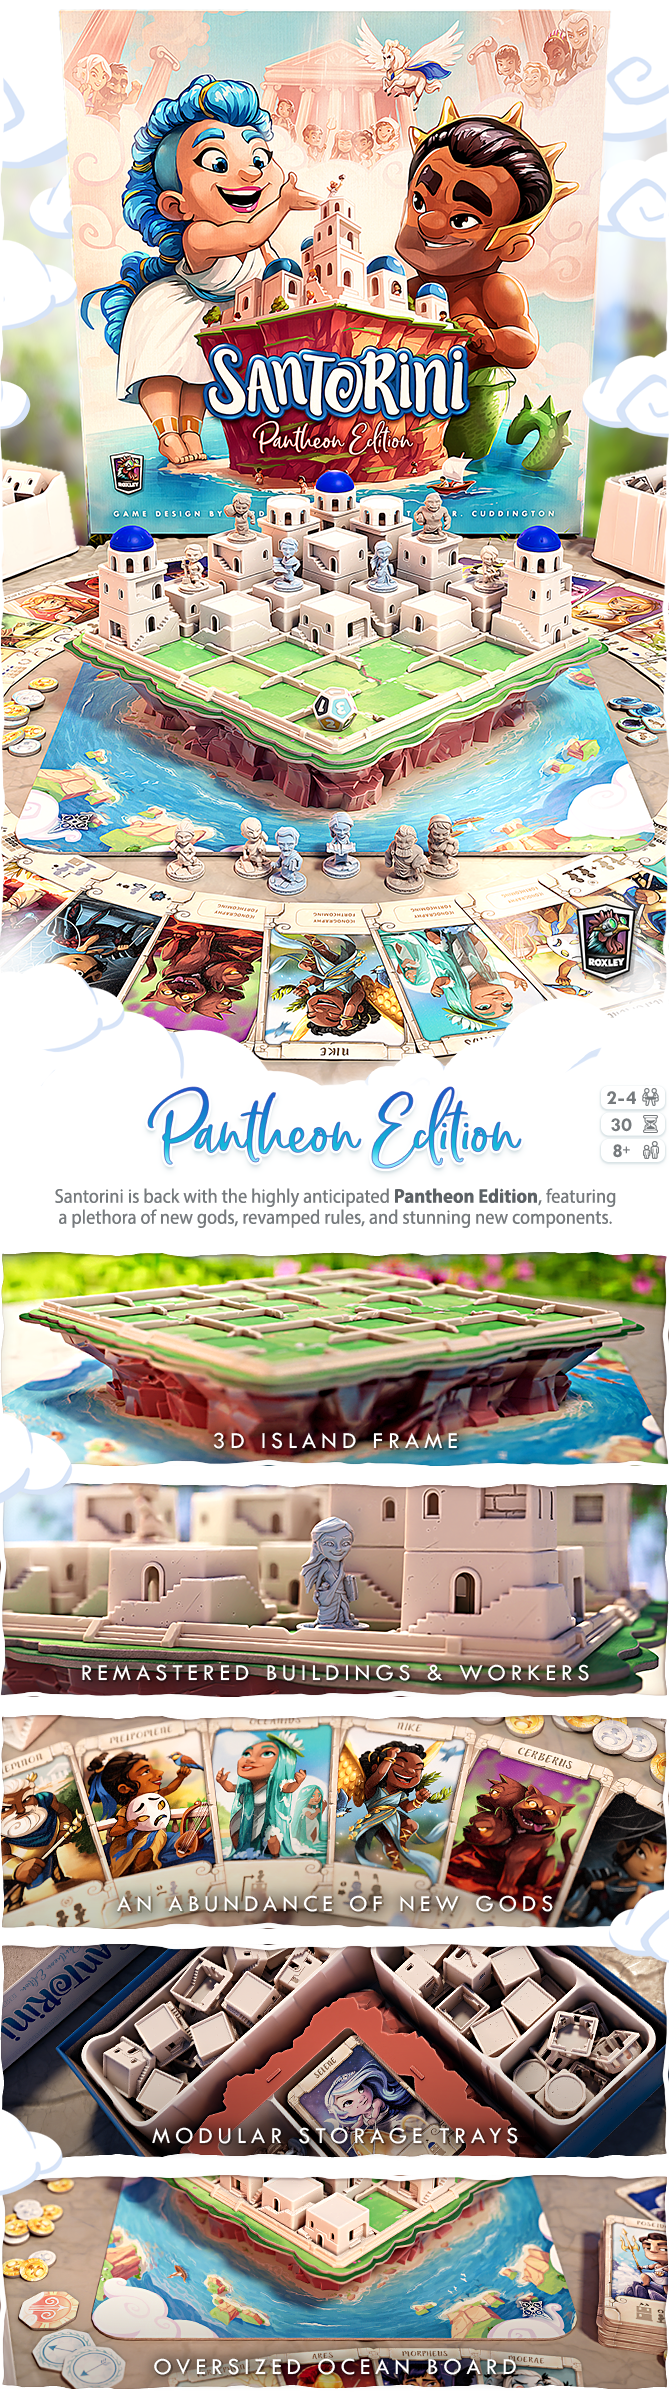 Santorini Pantheon Collector's Edition + Riddle of the Sphinx with Synth Card Full Set(EN)